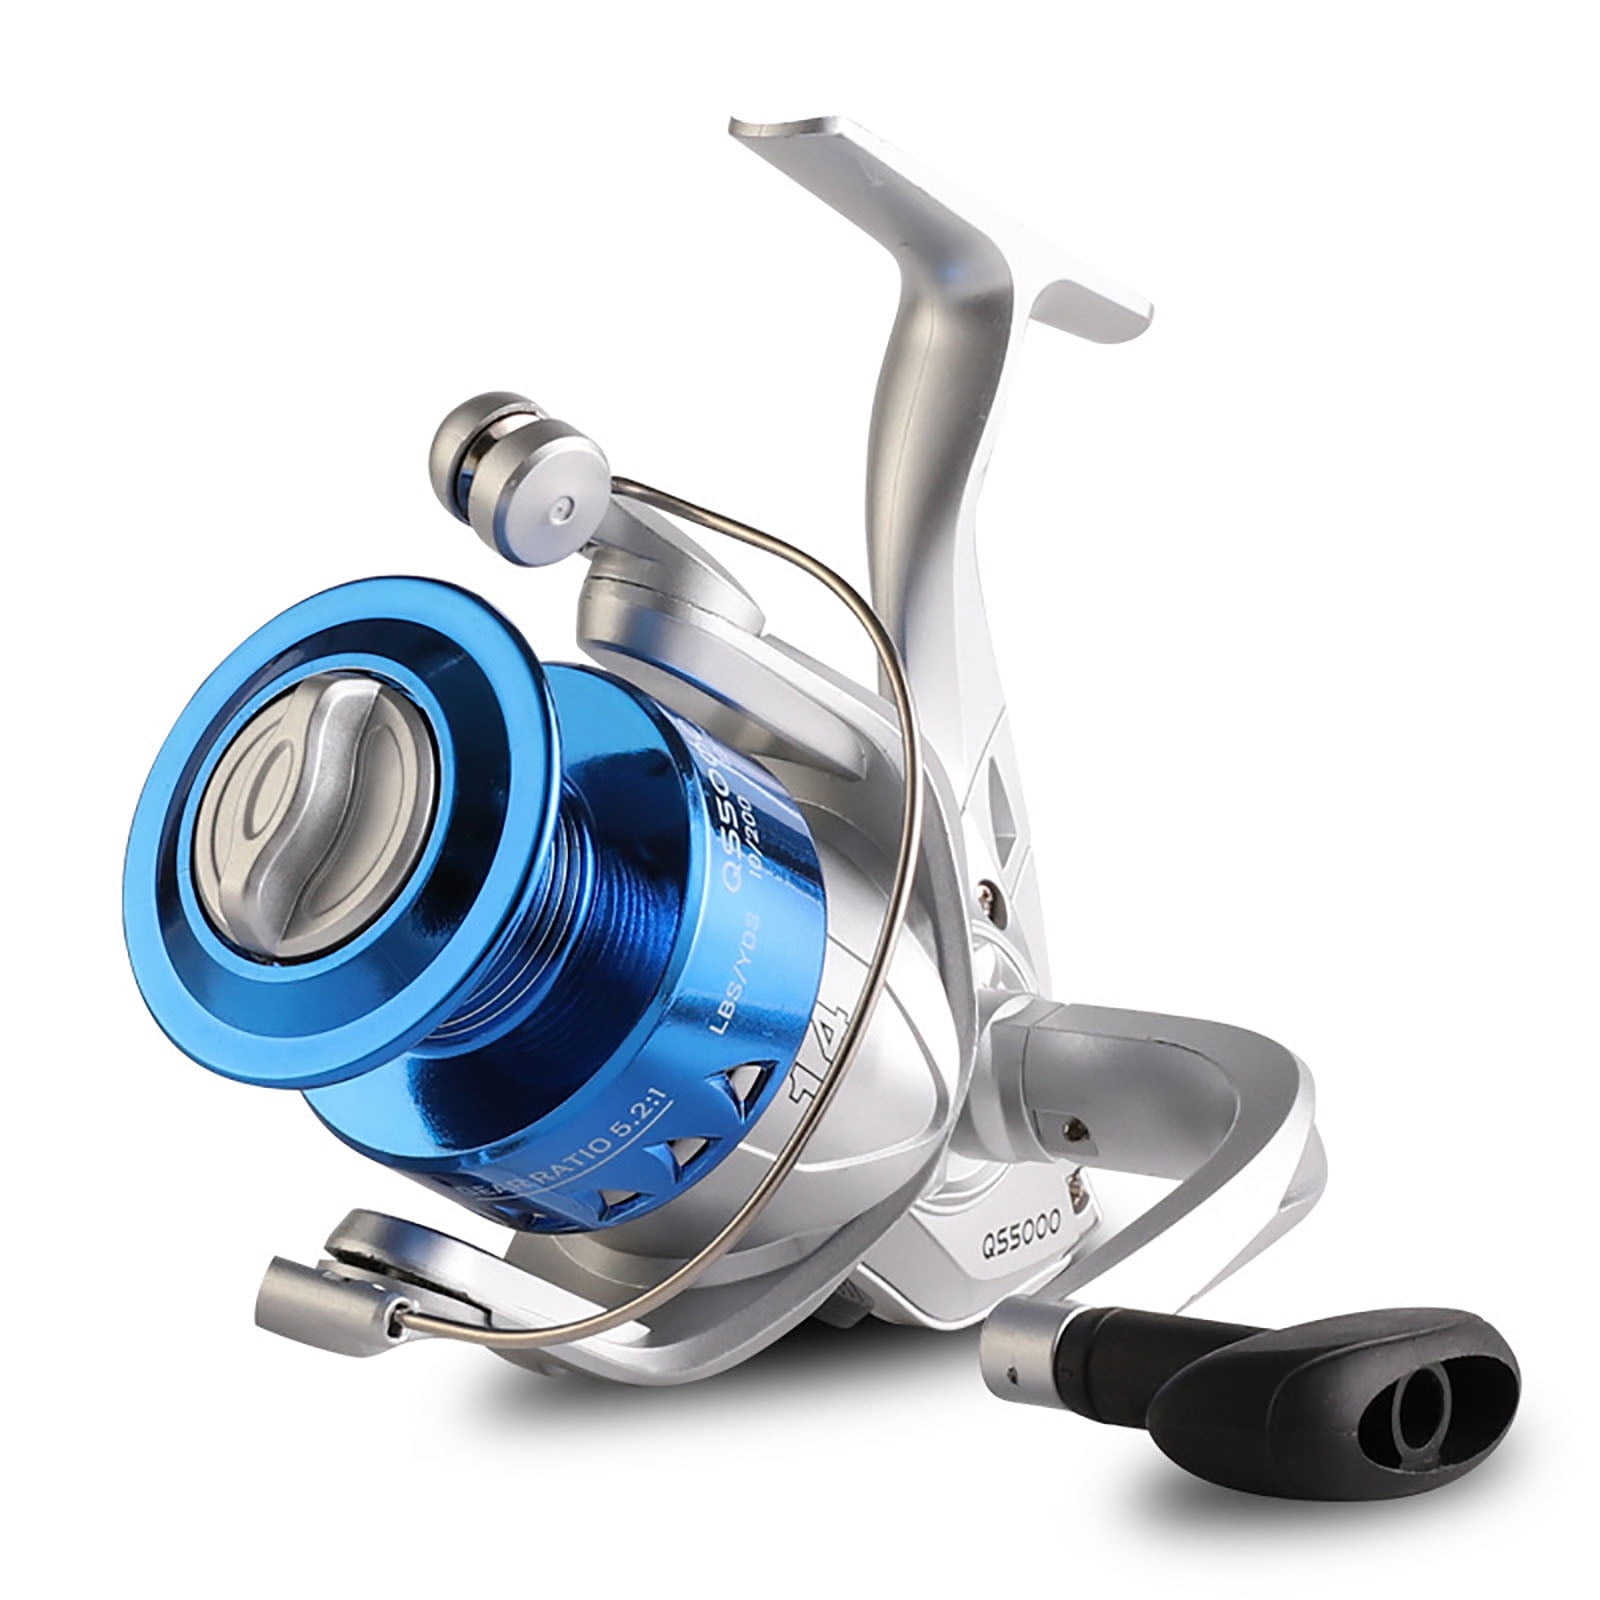 Lure Spinning Fishing Reel Max Drag 5kg Gear Ratio 5.2:1 1000-7000